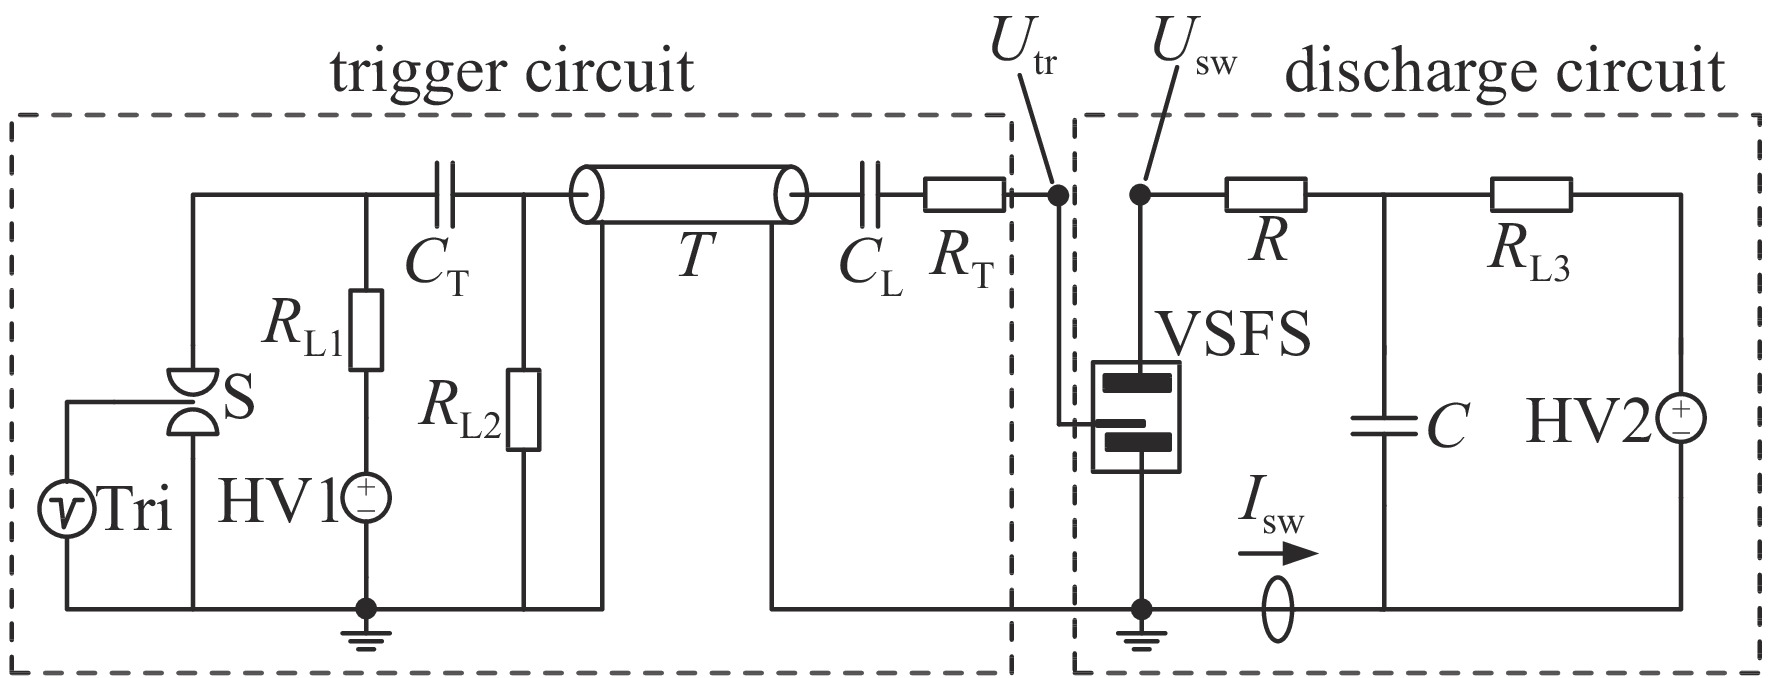 Circuit schematic for vacuum surface flashover switch test platform